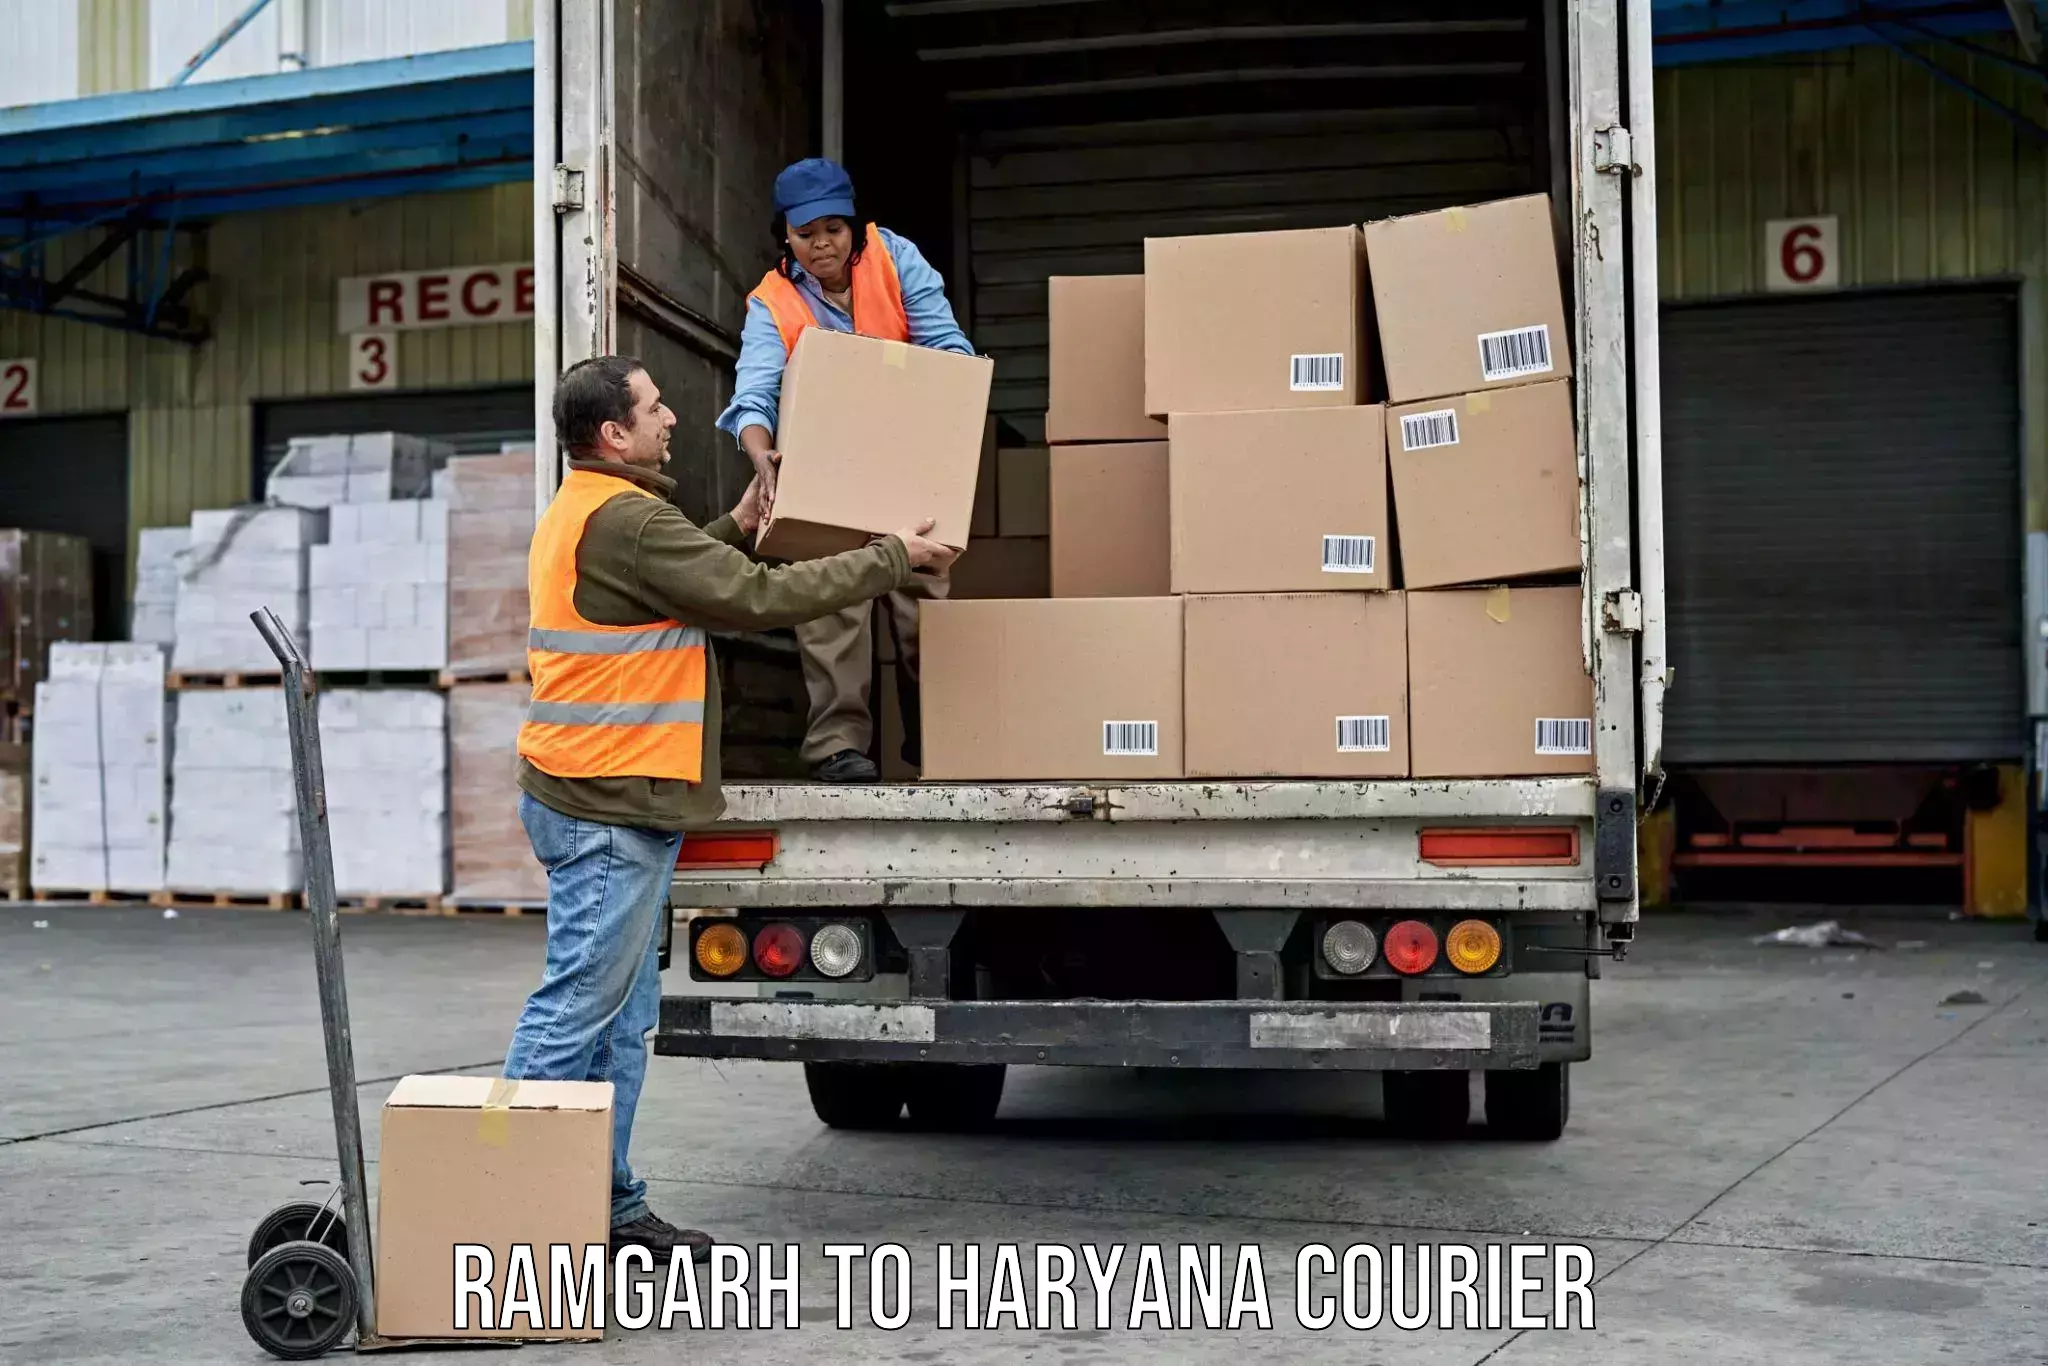 Luggage delivery network Ramgarh to Haryana